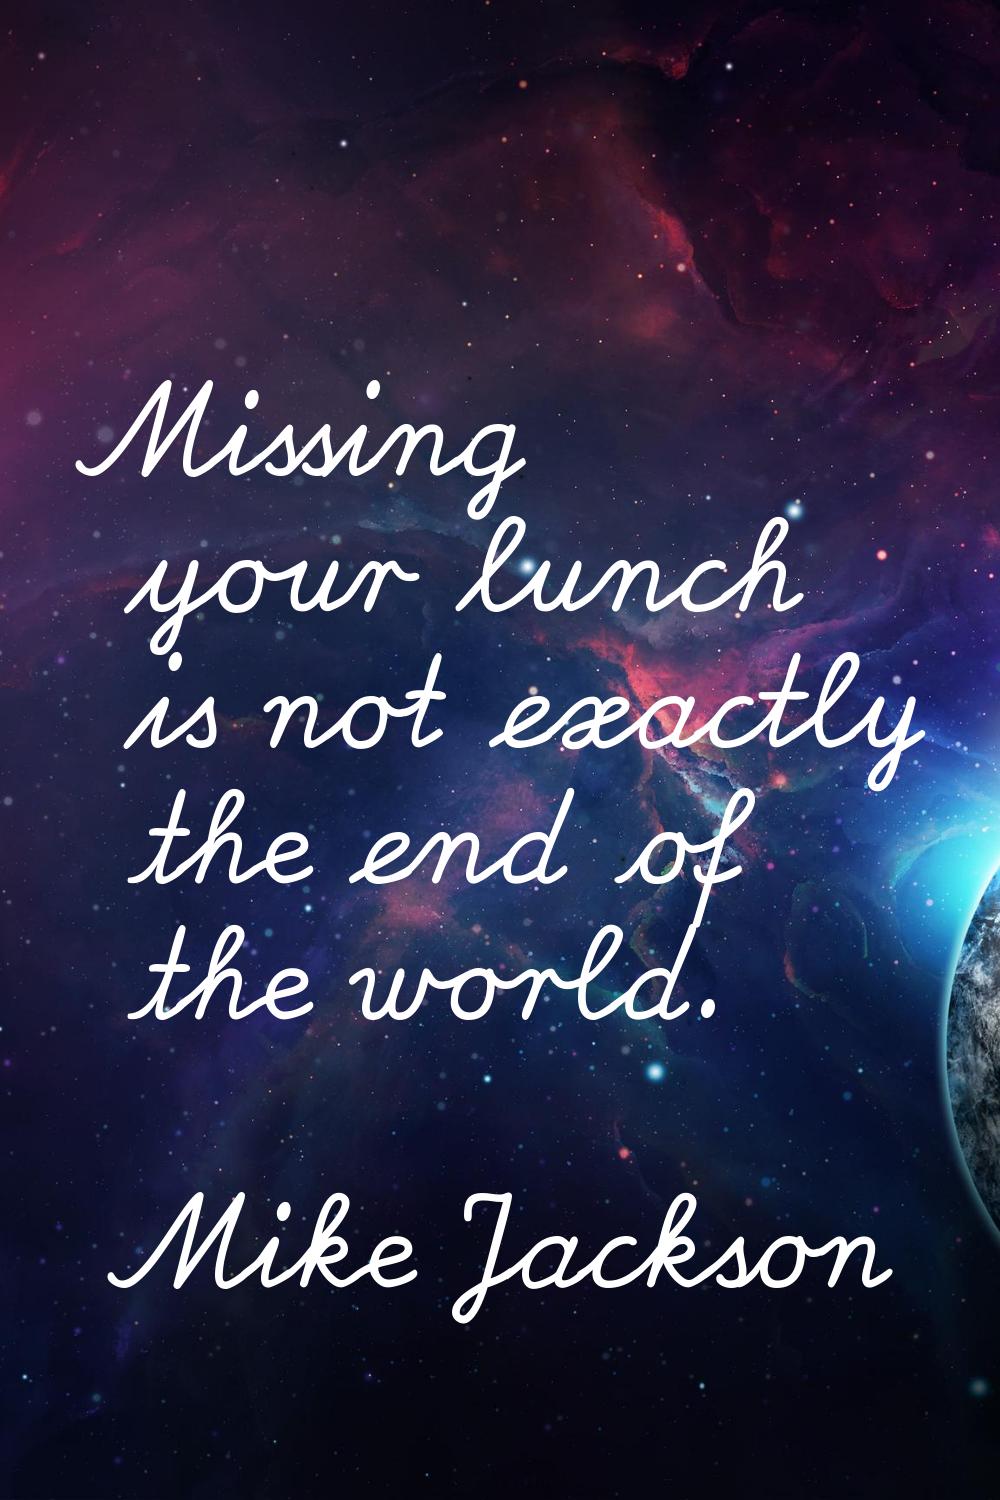 Missing your lunch is not exactly the end of the world.